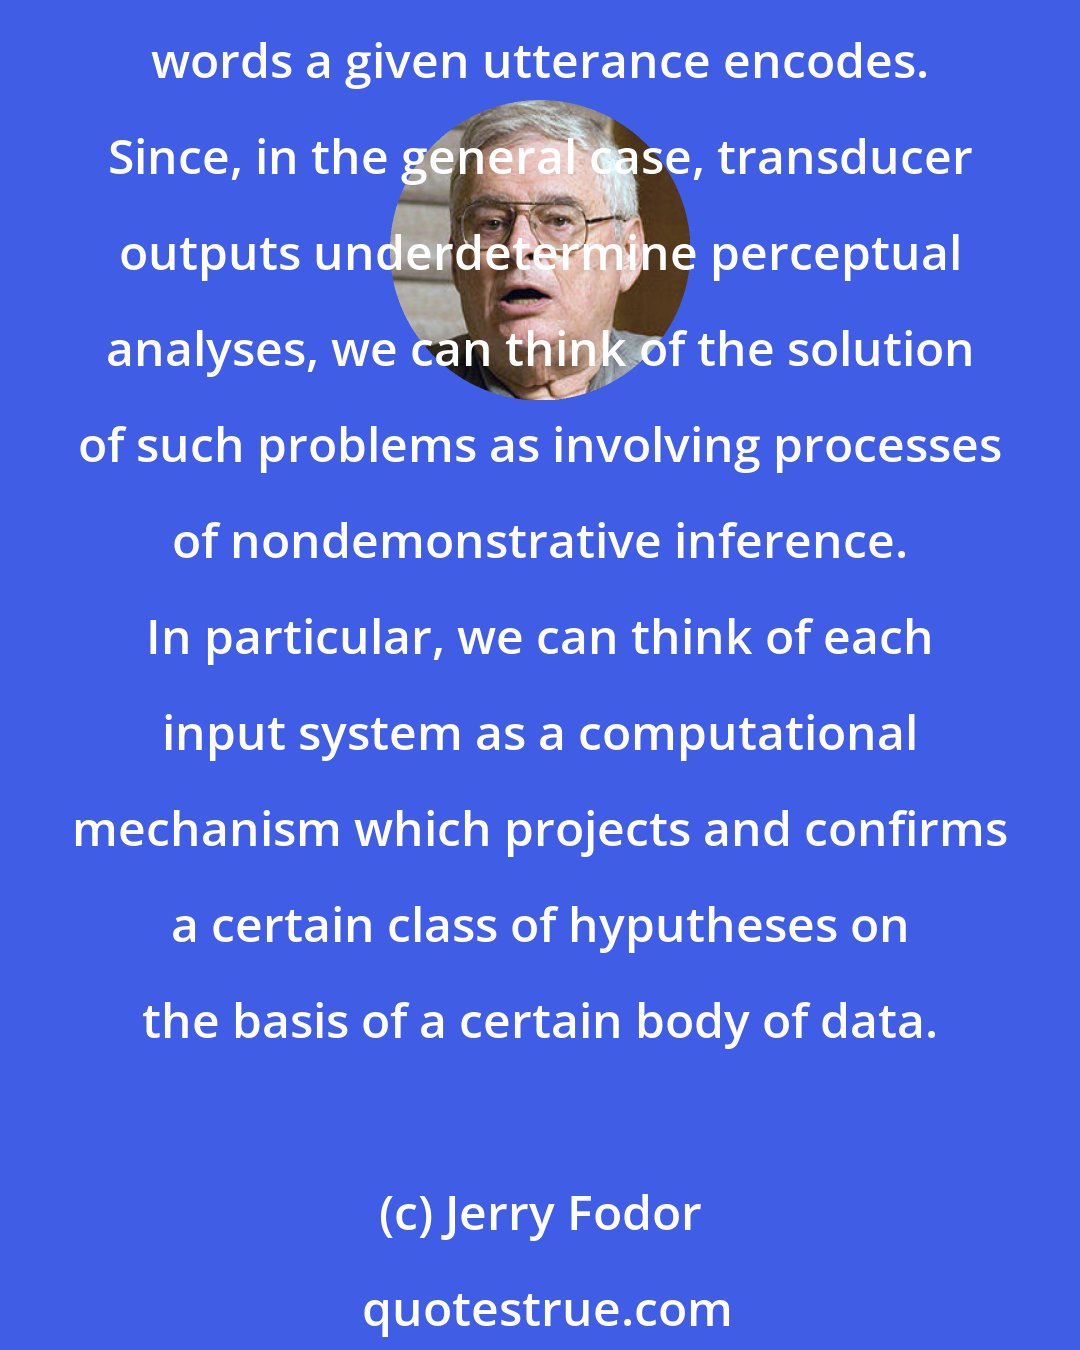 Jerry Fodor: Suppose that the organism is given the problem of determining the analysis of a stimulus at a certain level of representation - e.g., the problem of determining which sequence of words a given utterance encodes. Since, in the general case, transducer outputs underdetermine perceptual analyses, we can think of the solution of such problems as involving processes of nondemonstrative inference. In particular, we can think of each input system as a computational mechanism which projects and confirms a certain class of hyputheses on the basis of a certain body of data.